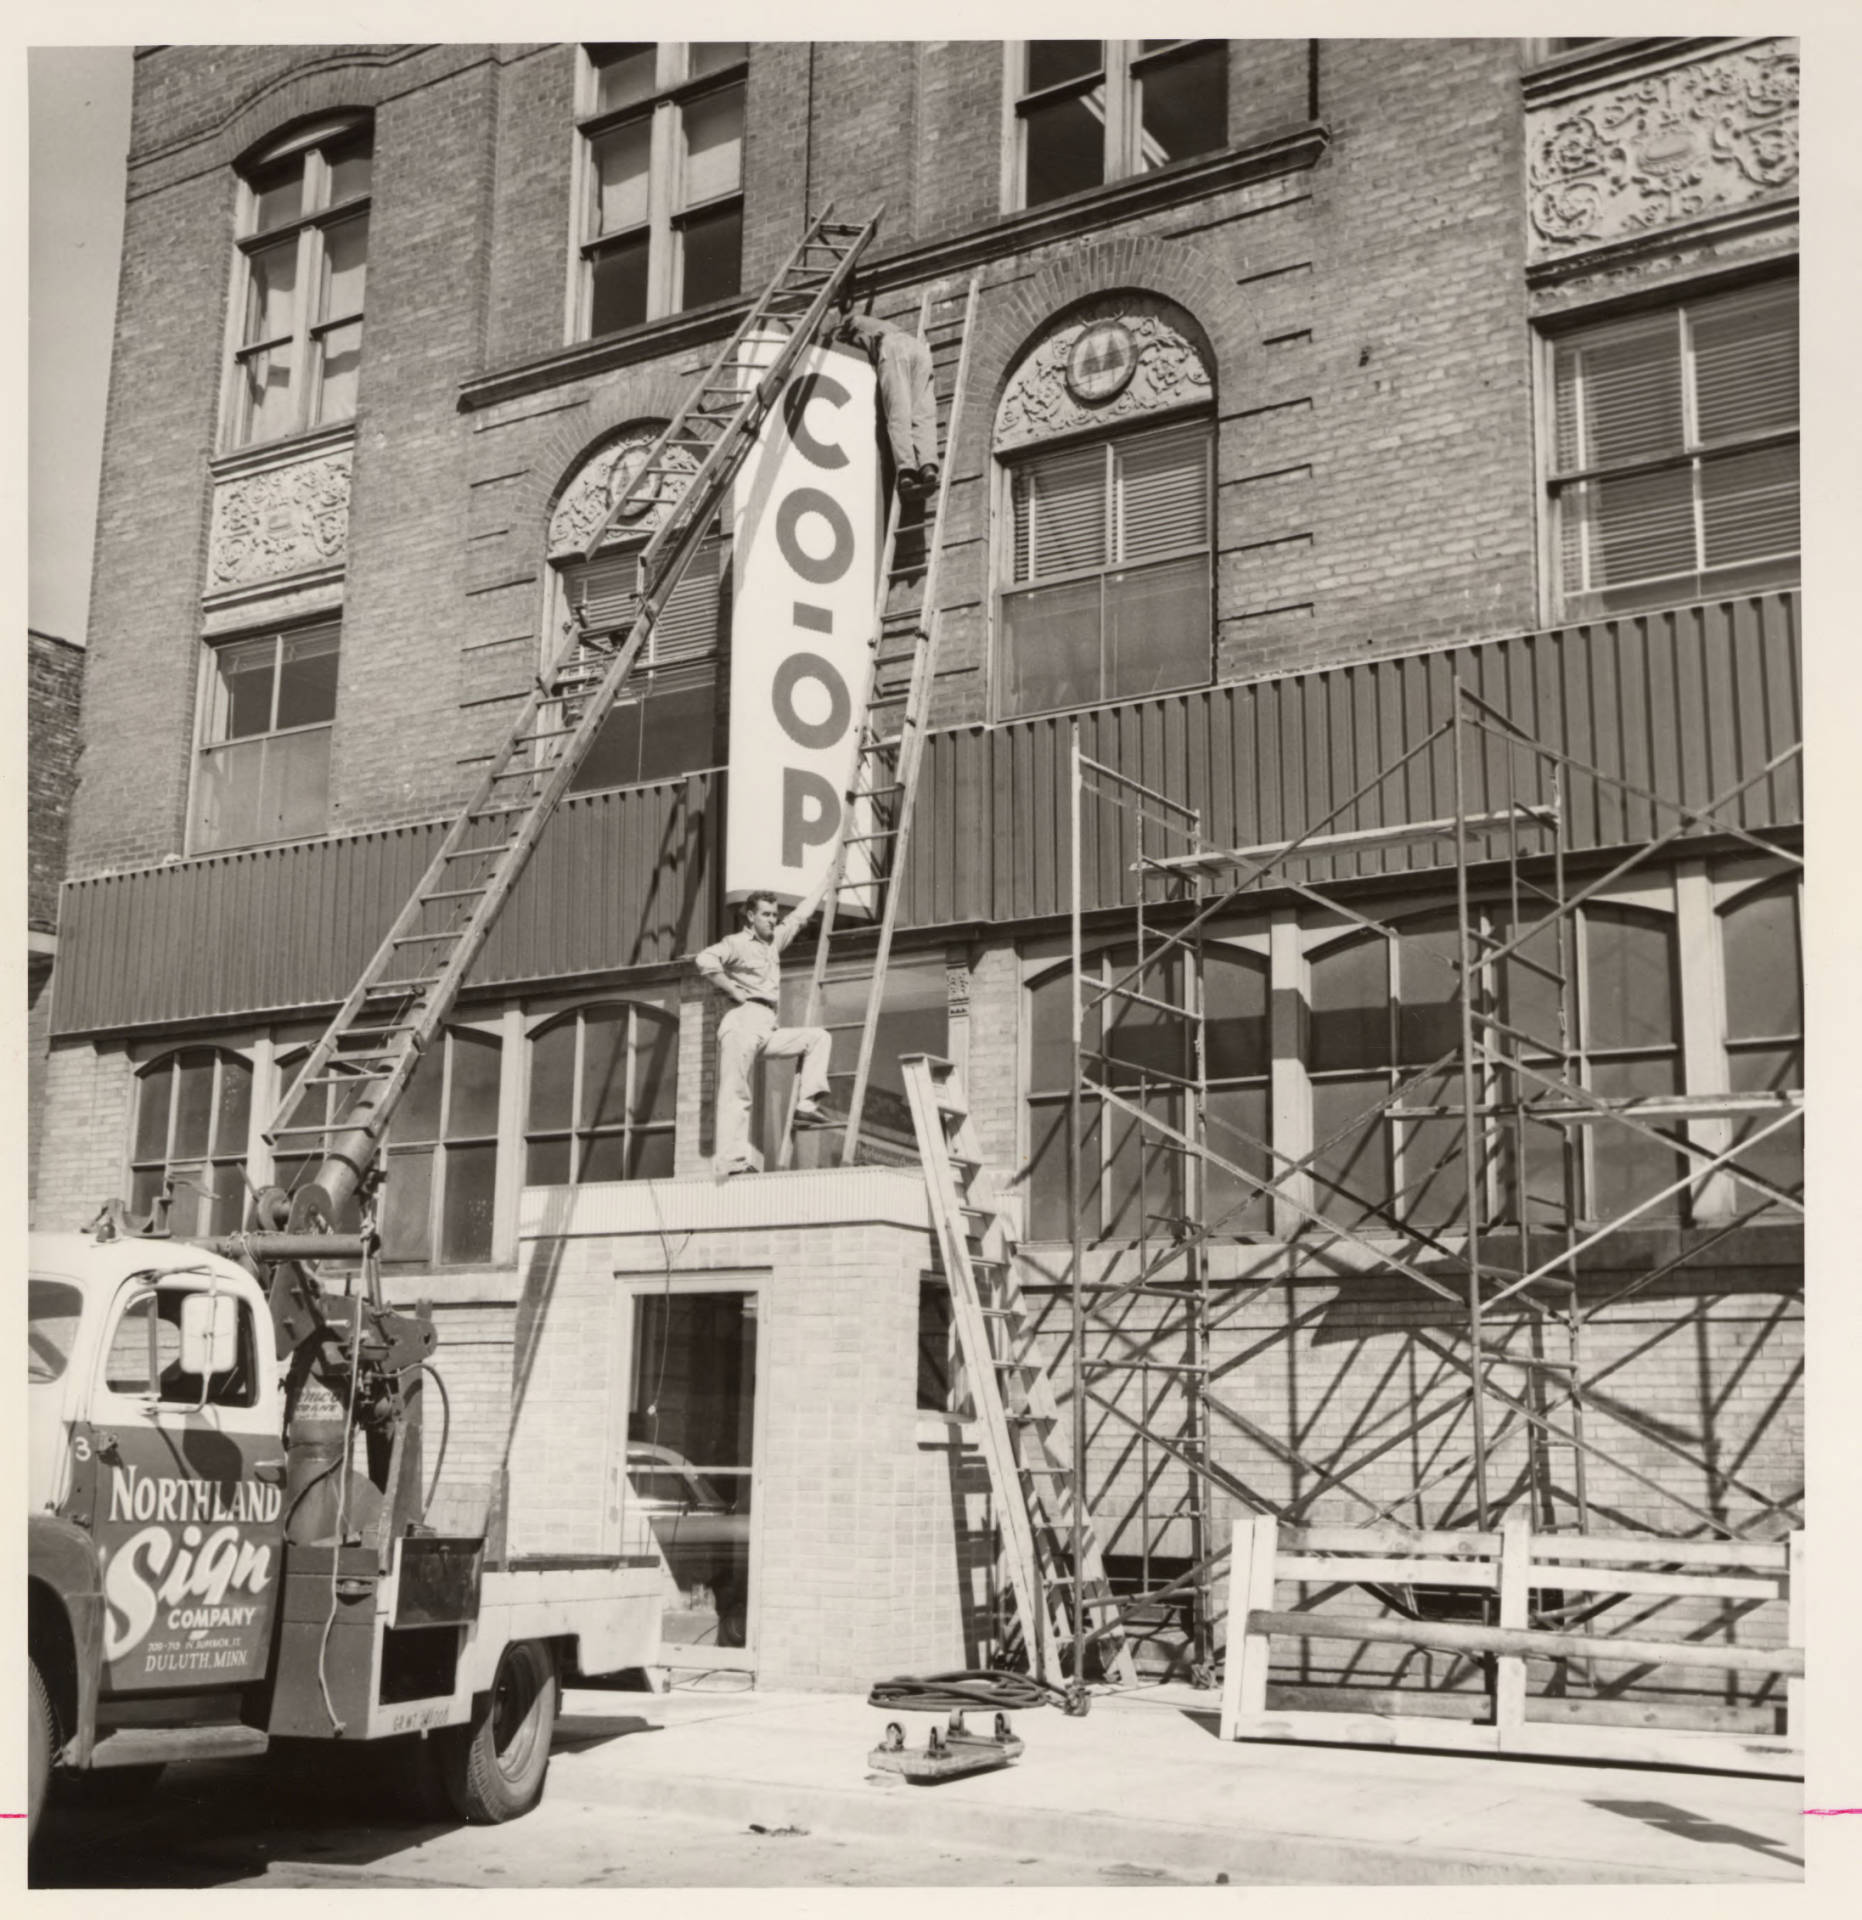 Installing new signs, Central Cooperative Wholesale Records, im111739, Box 40, IHRCA426, Immigration History Research Center Archives, University of Minnesota.